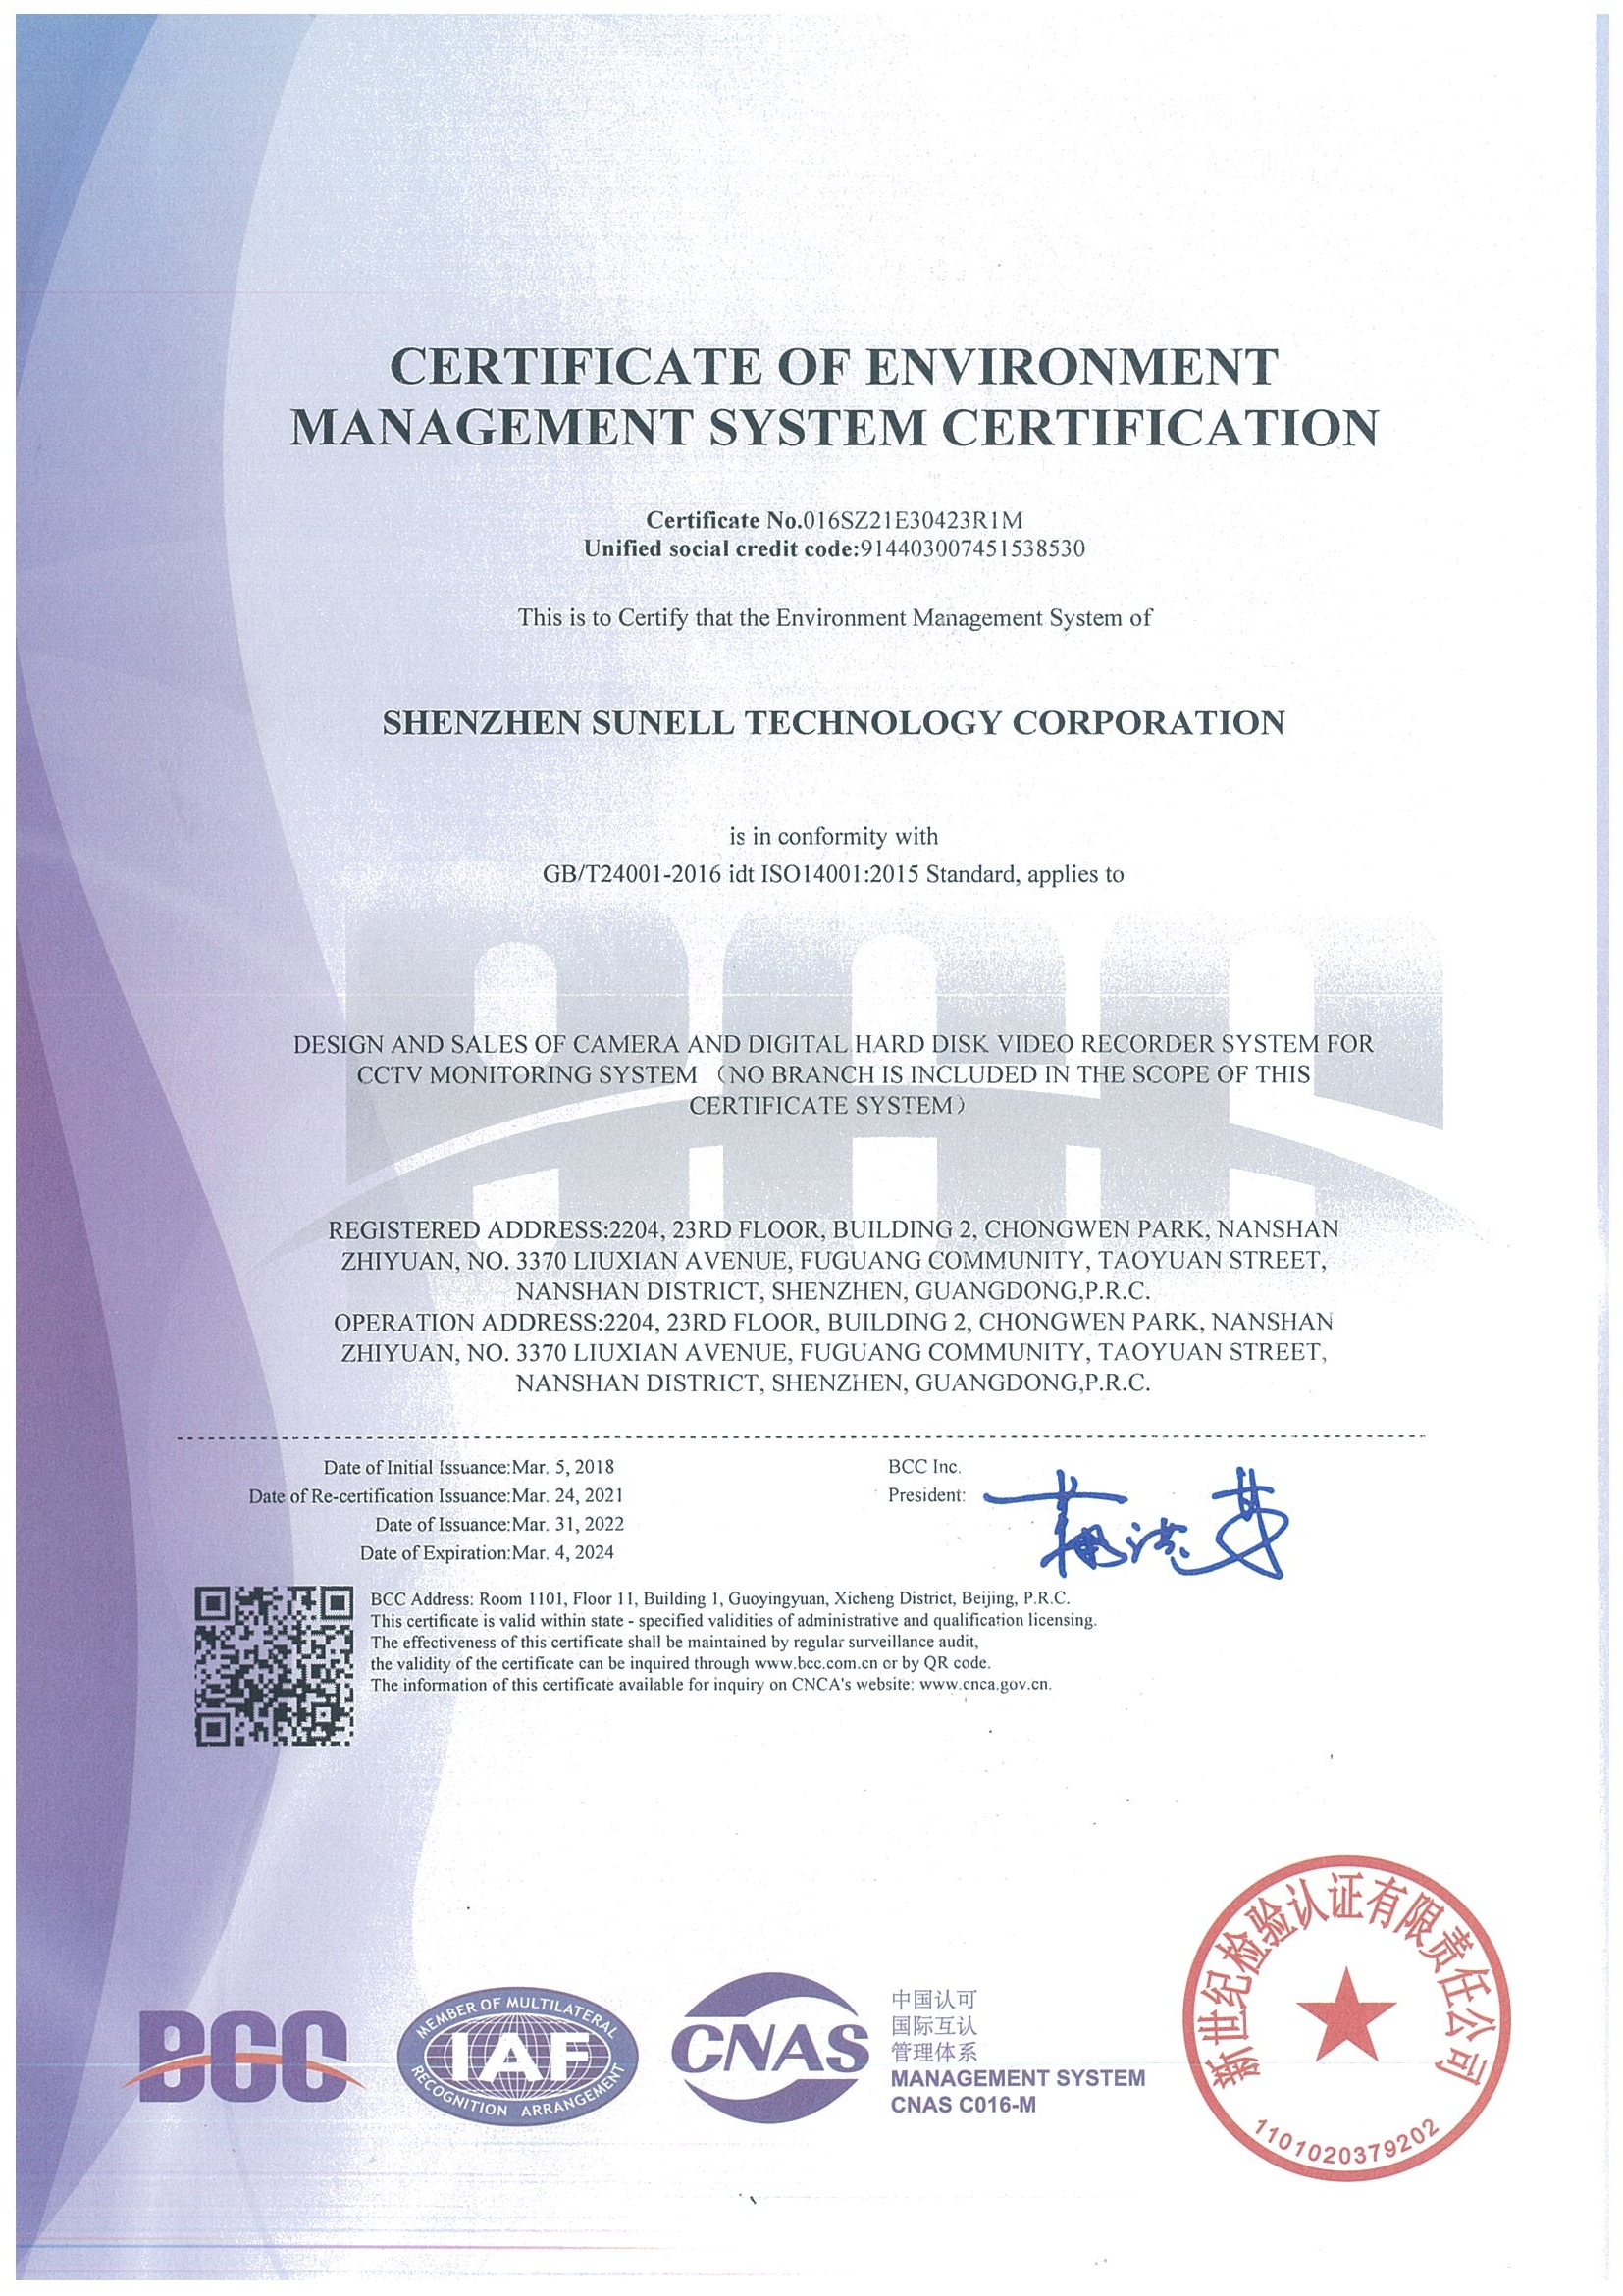 ip products certificate about iso14001